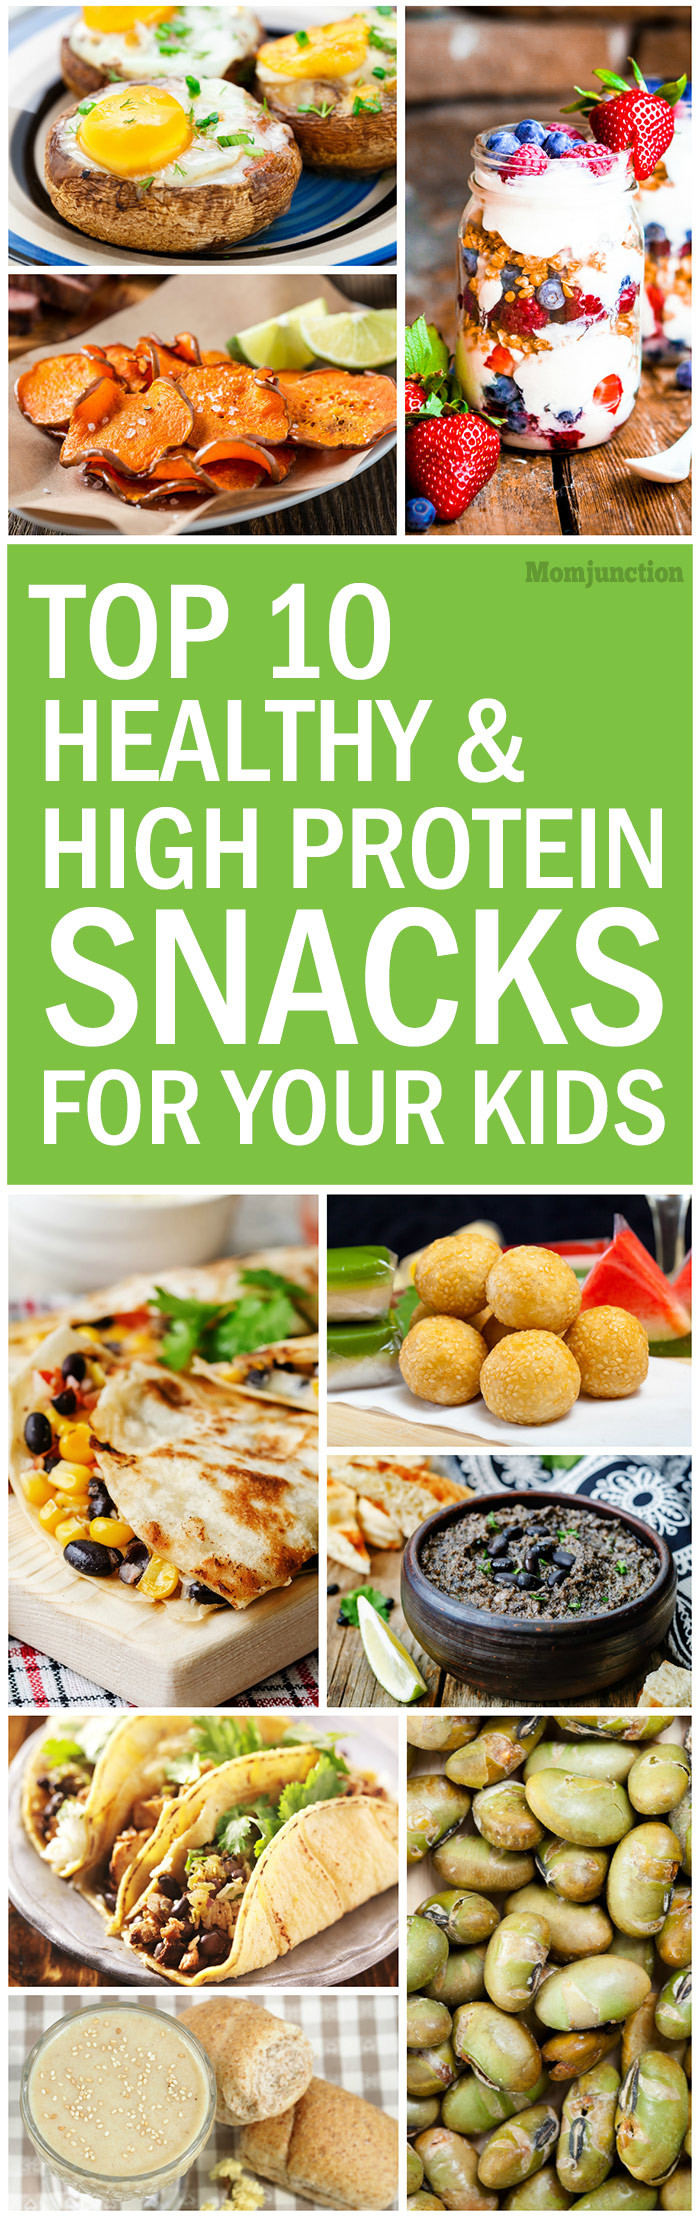 Healthy Protein Snacks
 10 Healthy And High Protein Snacks For Kids